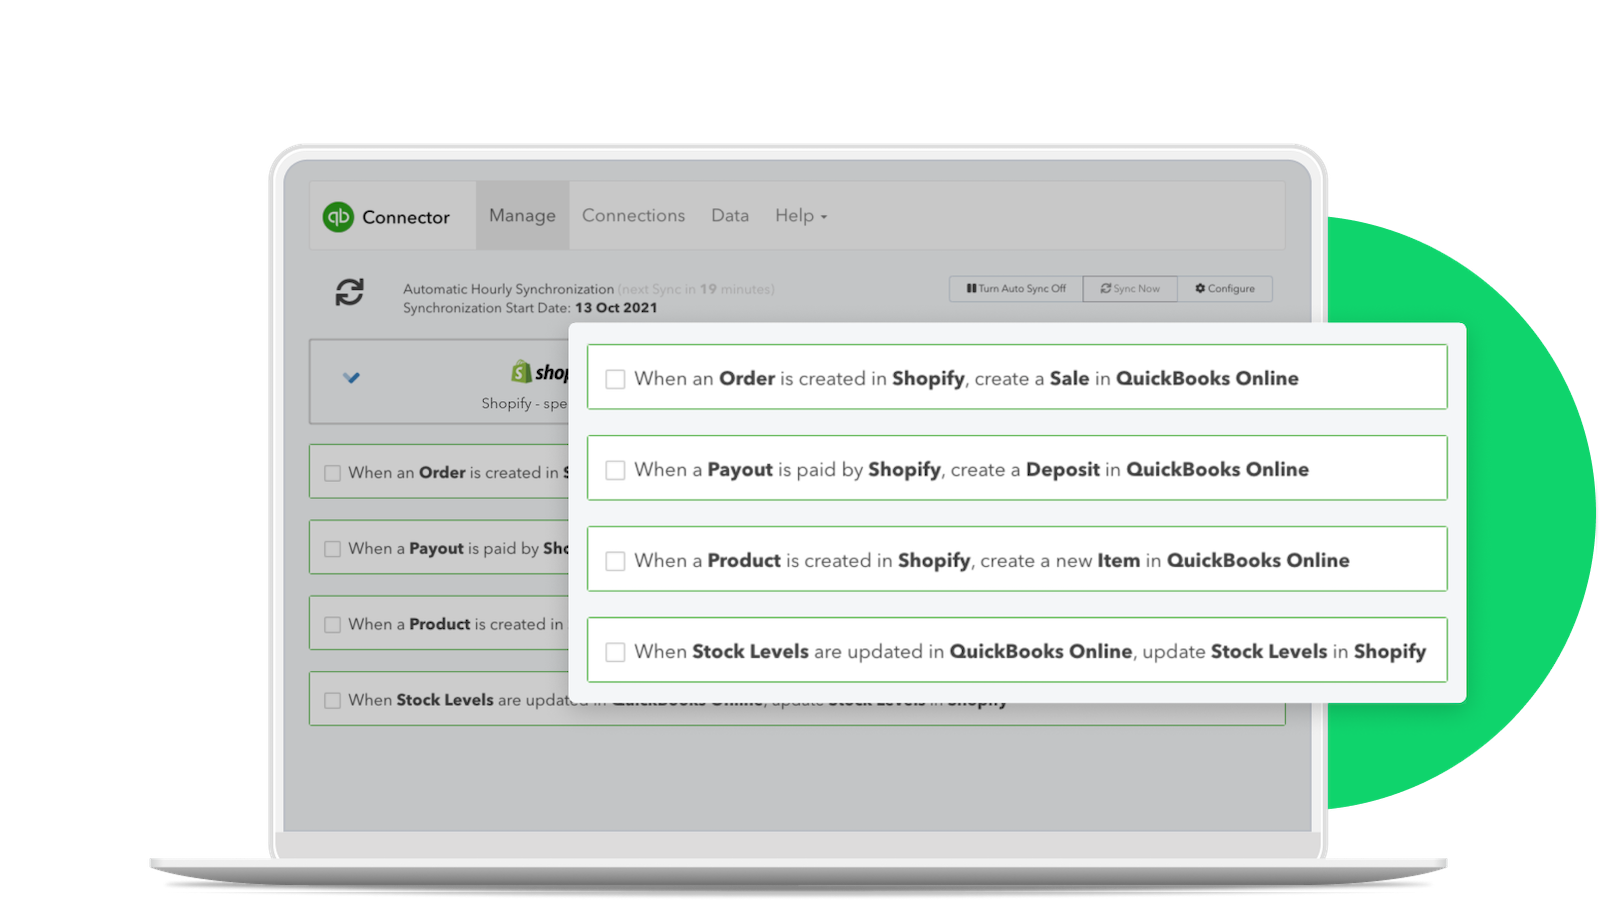 Set up workflows based on your business needs.